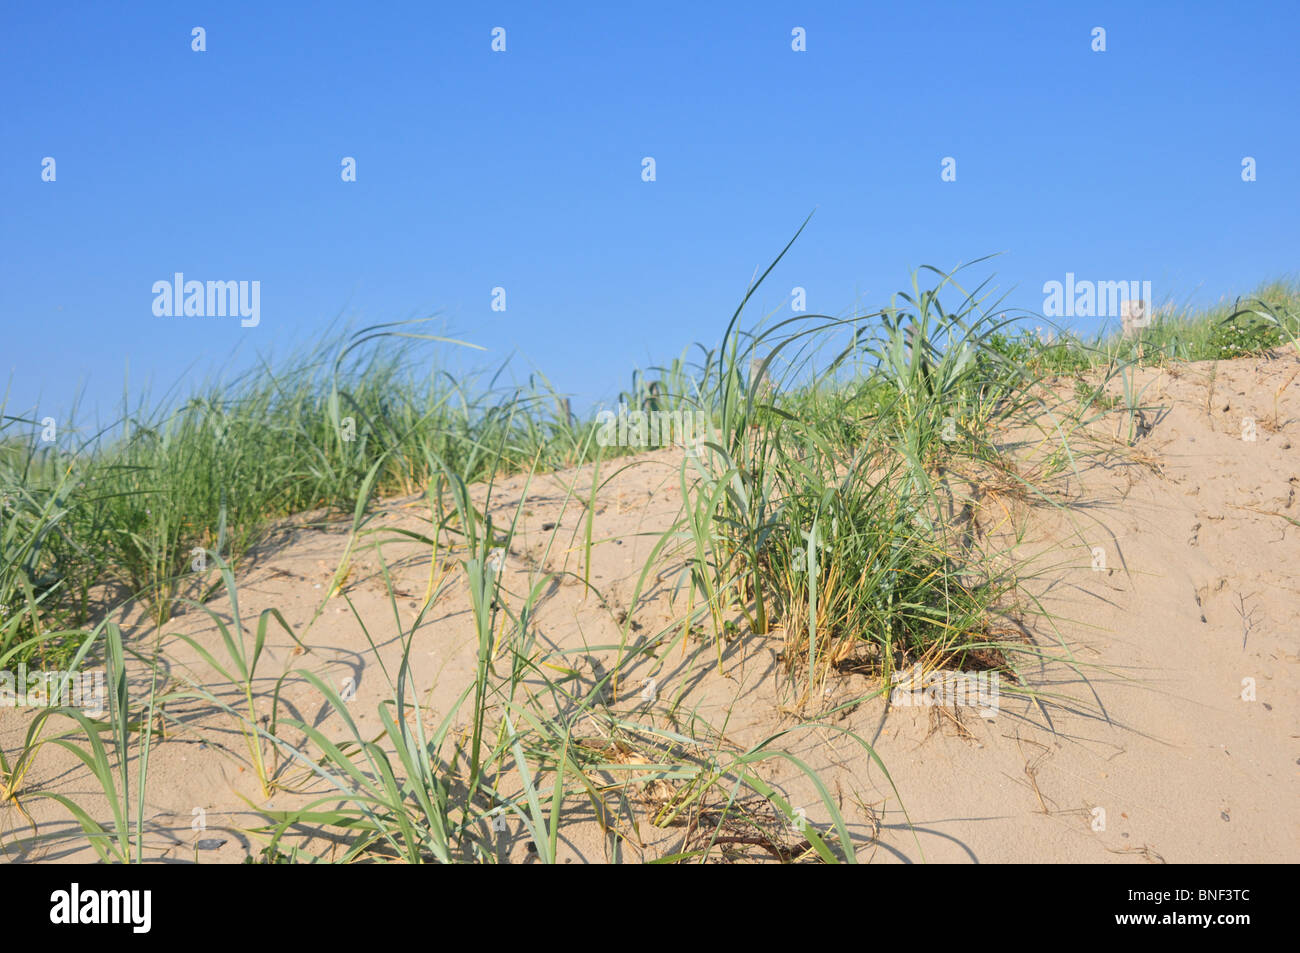 Sea grass growing on a sandy dune at the beach Stock Photo